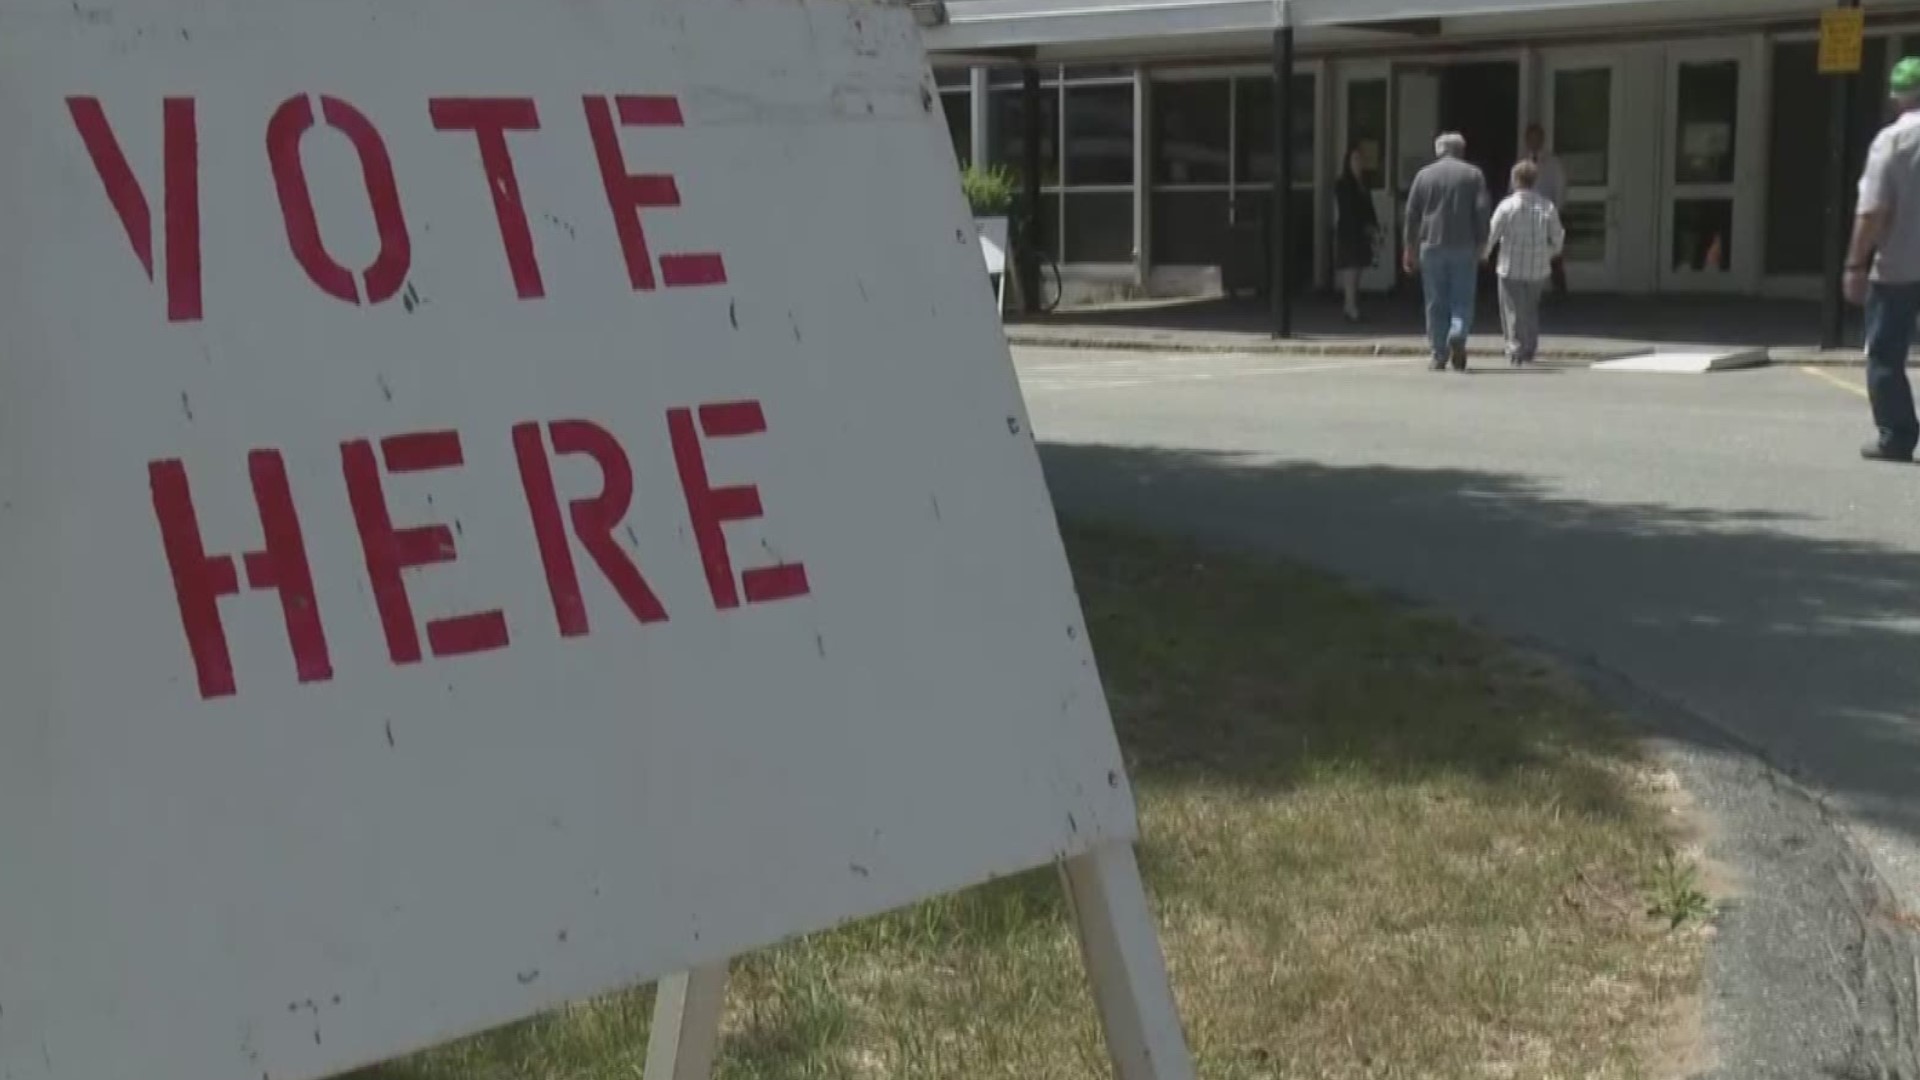 Lawmakers met Monday to discuss a new law that would restrict voting to only U.S. citizens.